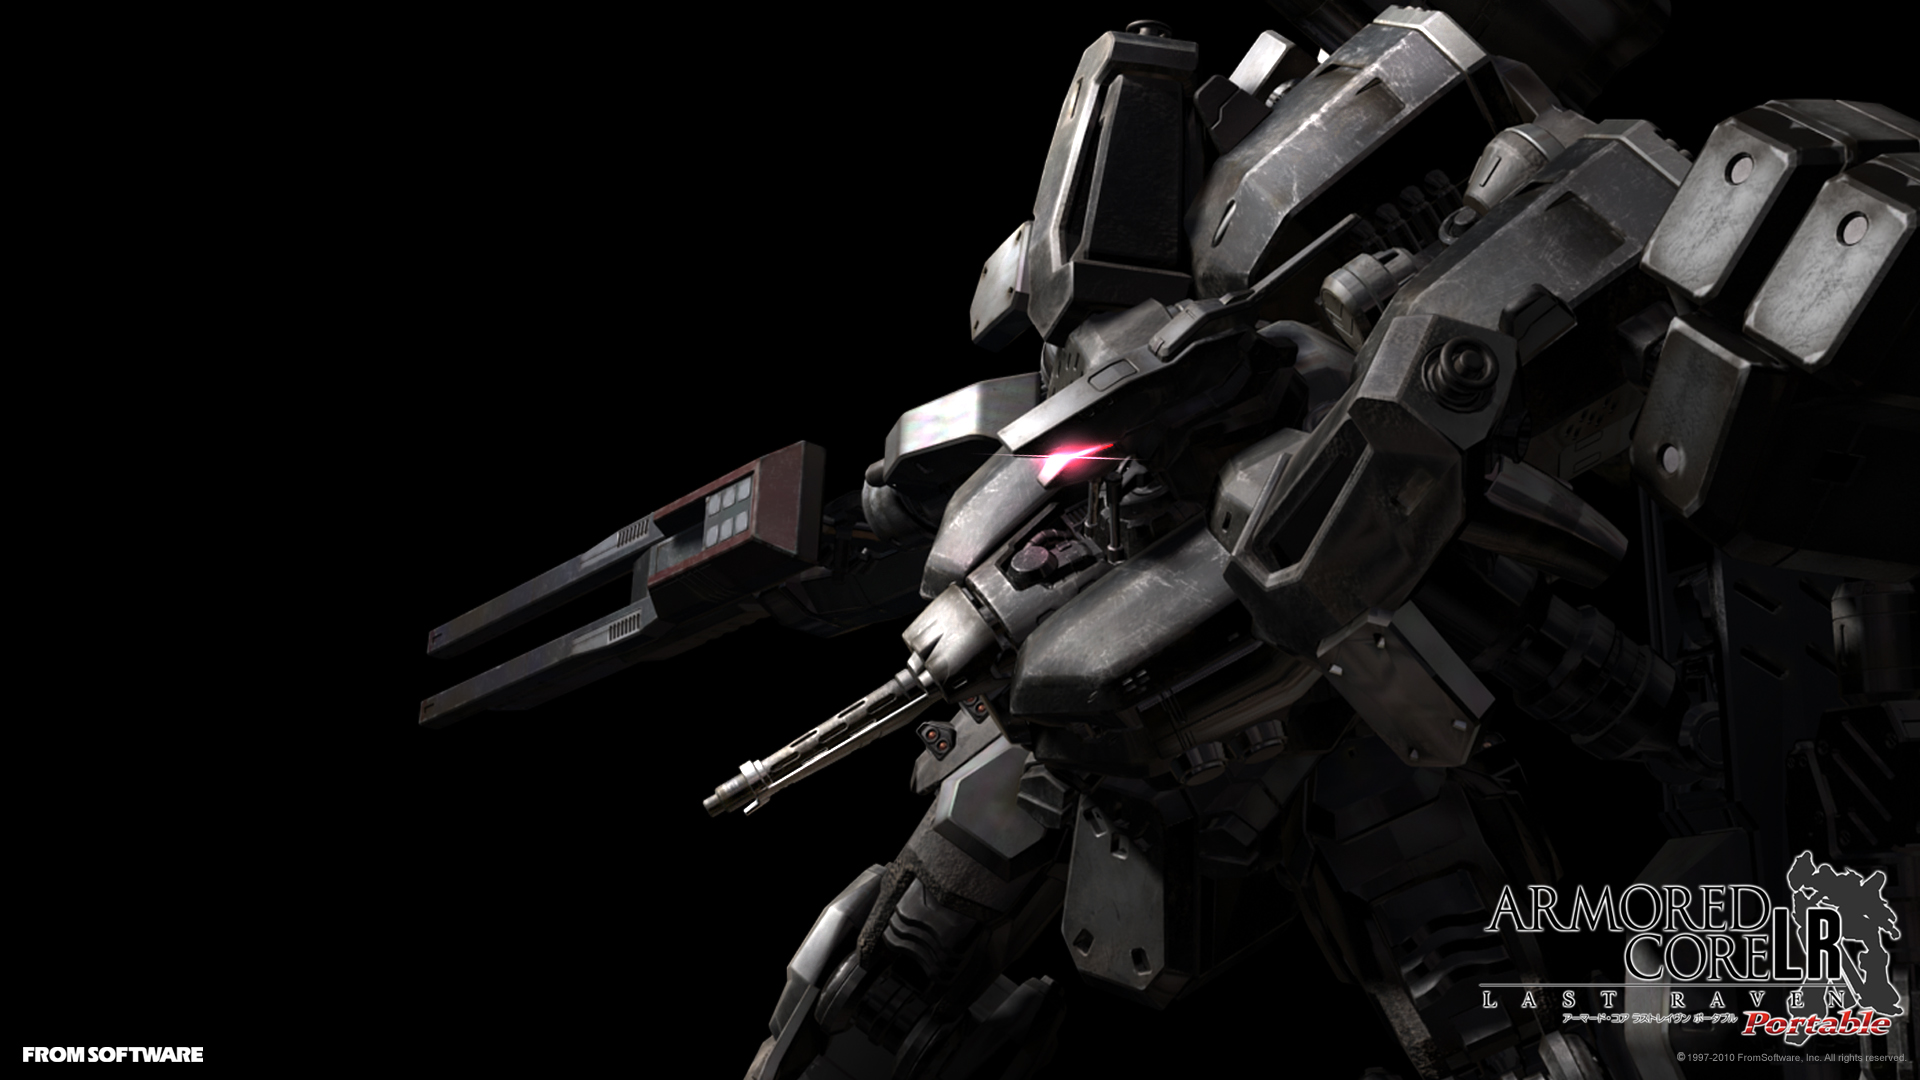 Free Download Armored Core Computer Wallpapers Desktop Backgrounds 19x1080 For Your Desktop Mobile Tablet Explore 74 Armored Core Wallpaper Armored Core Wallpaper Armored Core 5 Wallpaper Armored Warfare Wallpaper